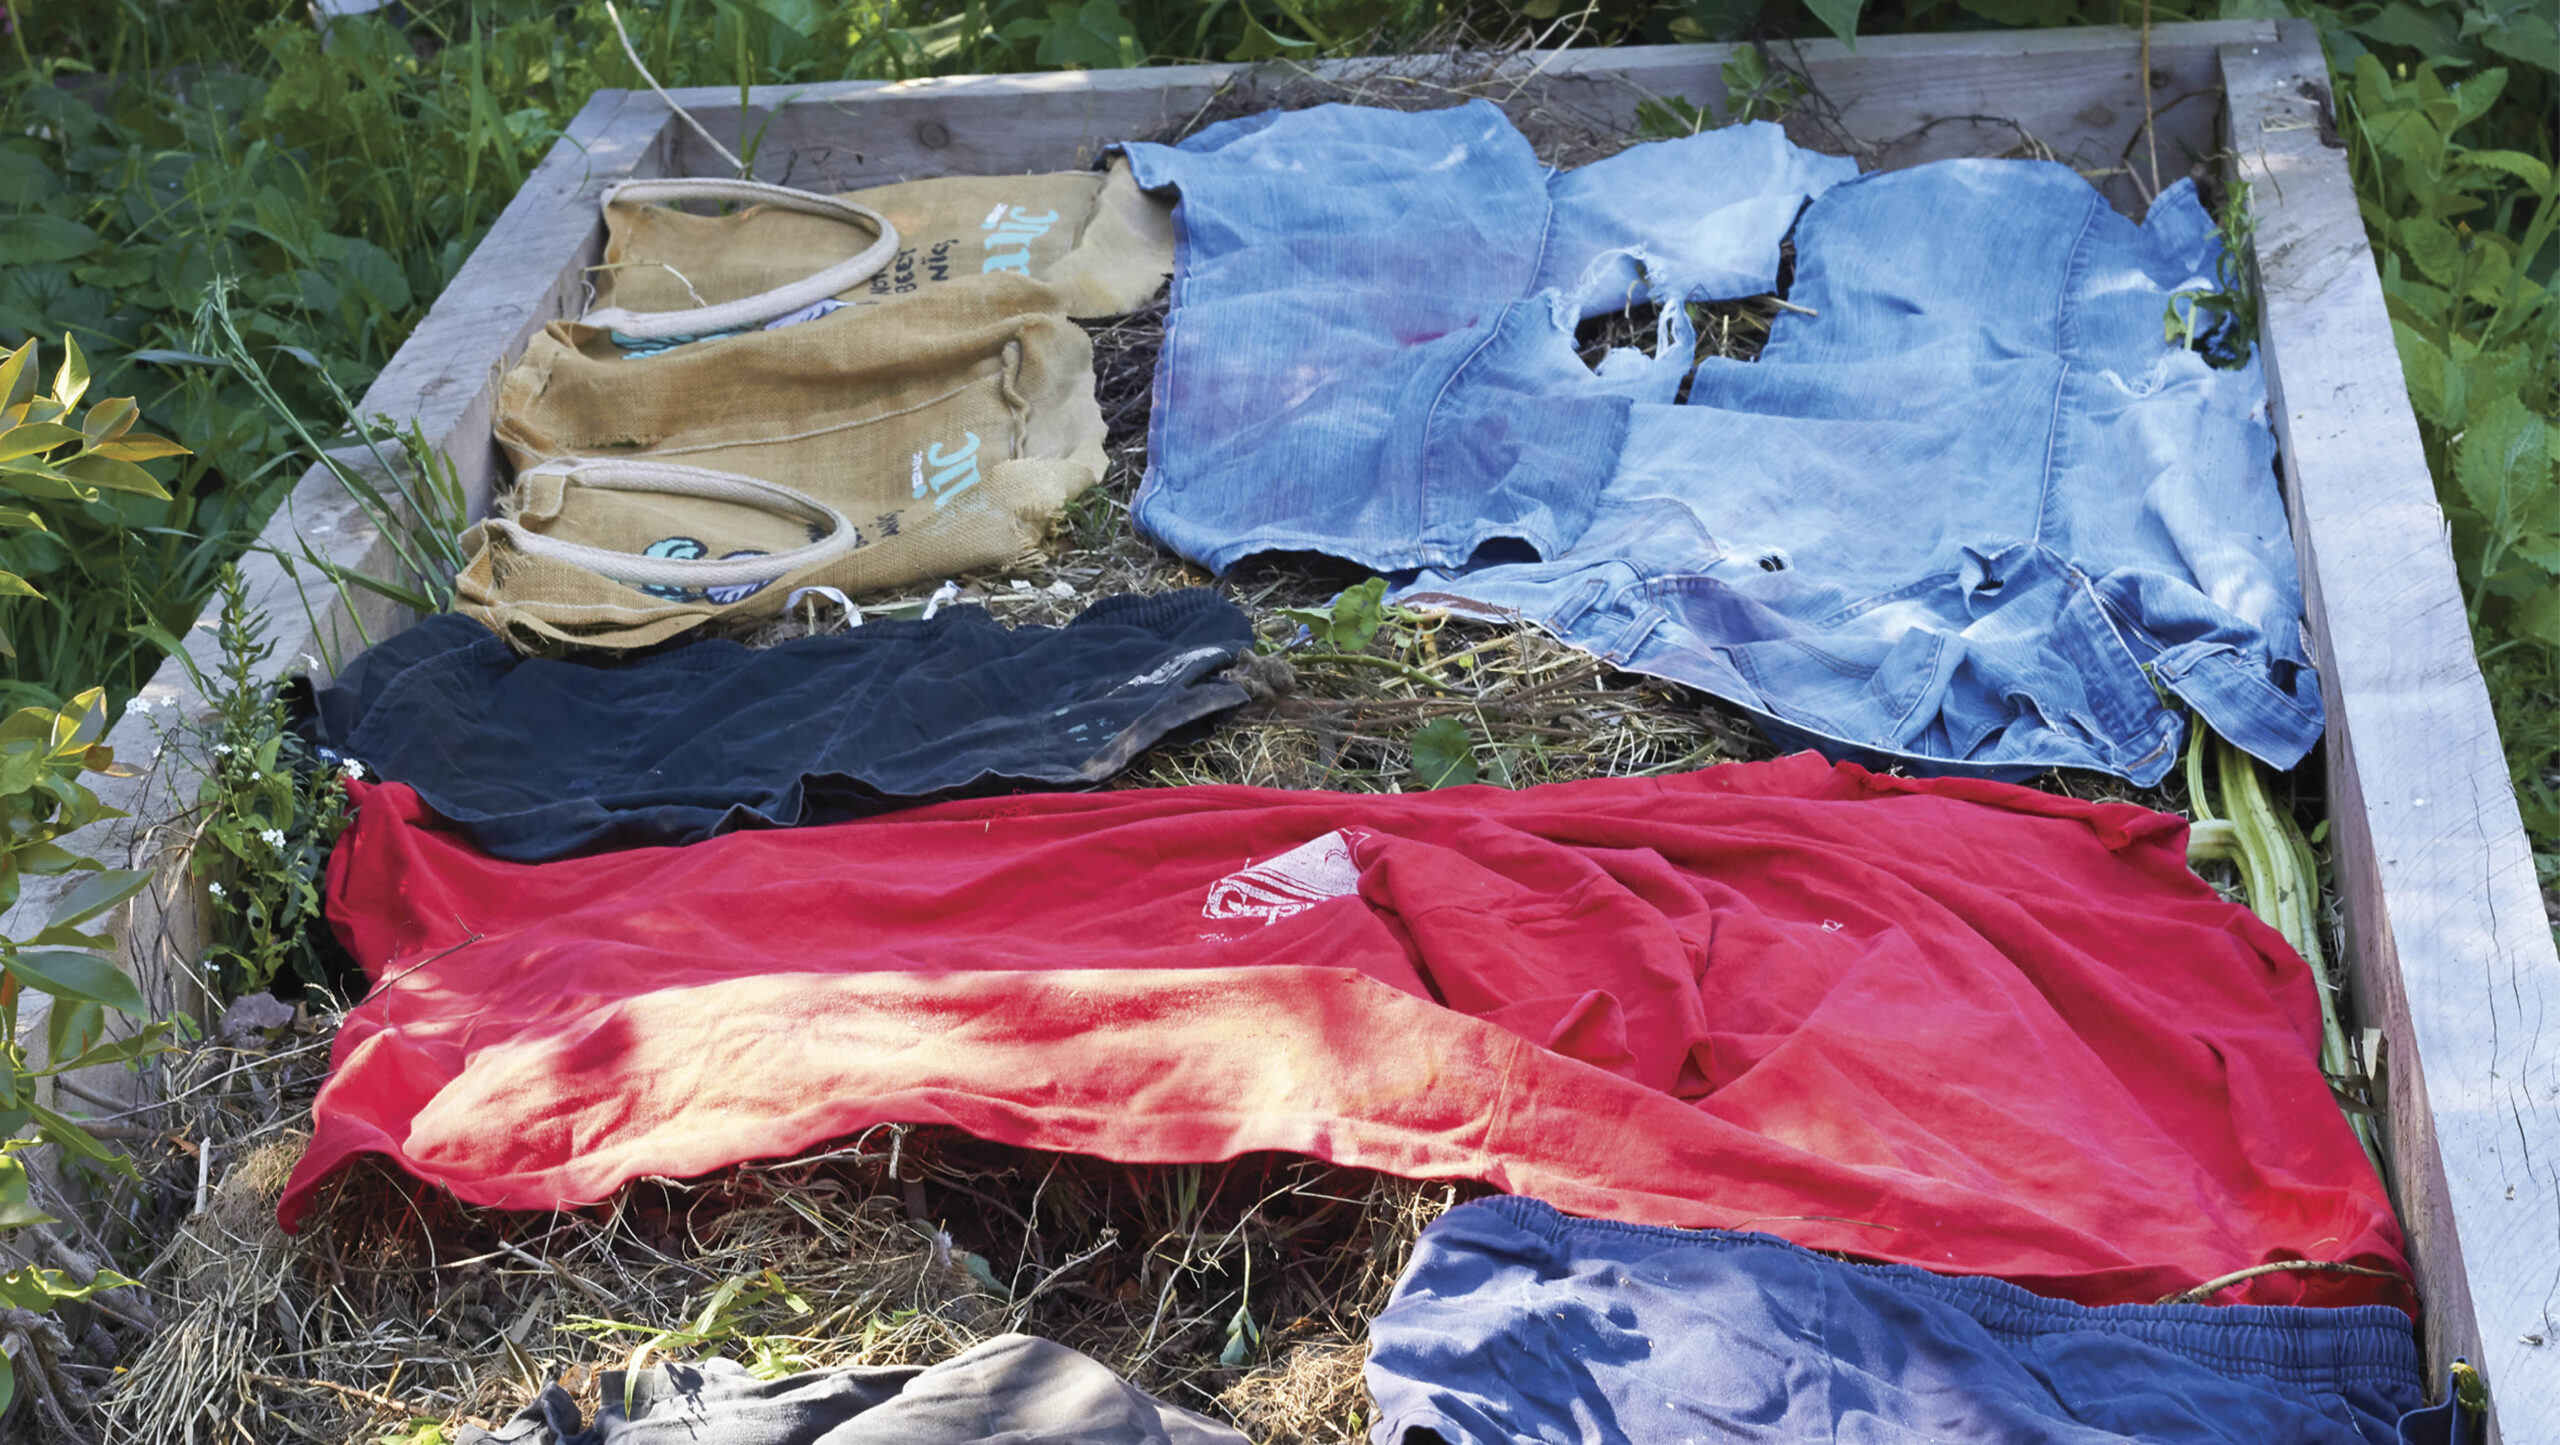 Olod clothes can be used on your garden bed as mulch; they will break down.